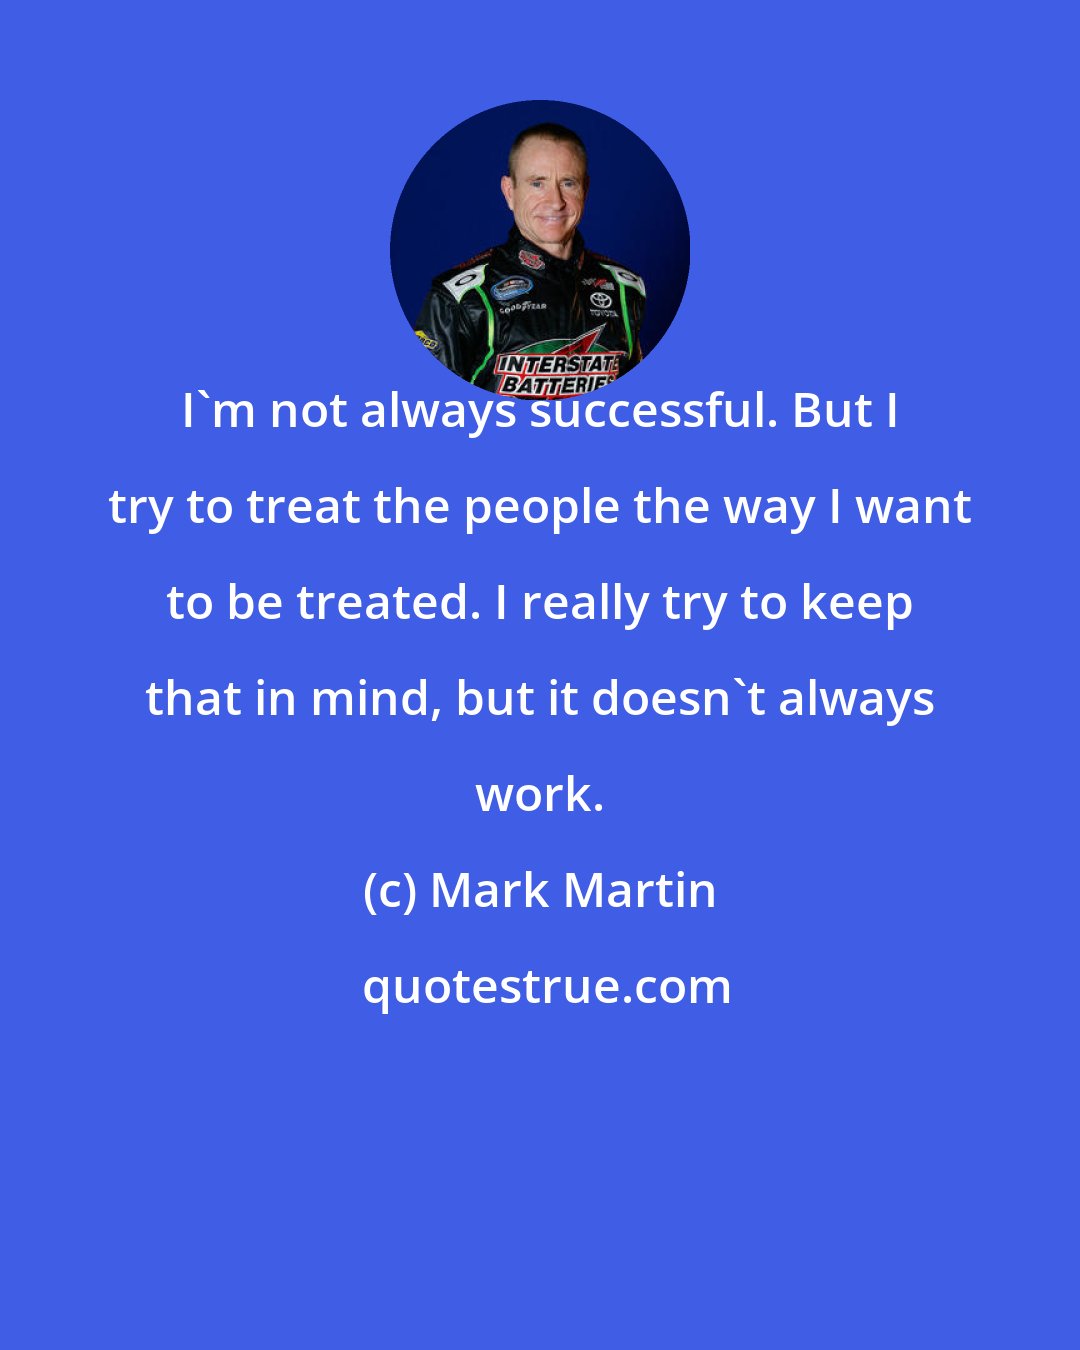 Mark Martin: I'm not always successful. But I try to treat the people the way I want to be treated. I really try to keep that in mind, but it doesn't always work.